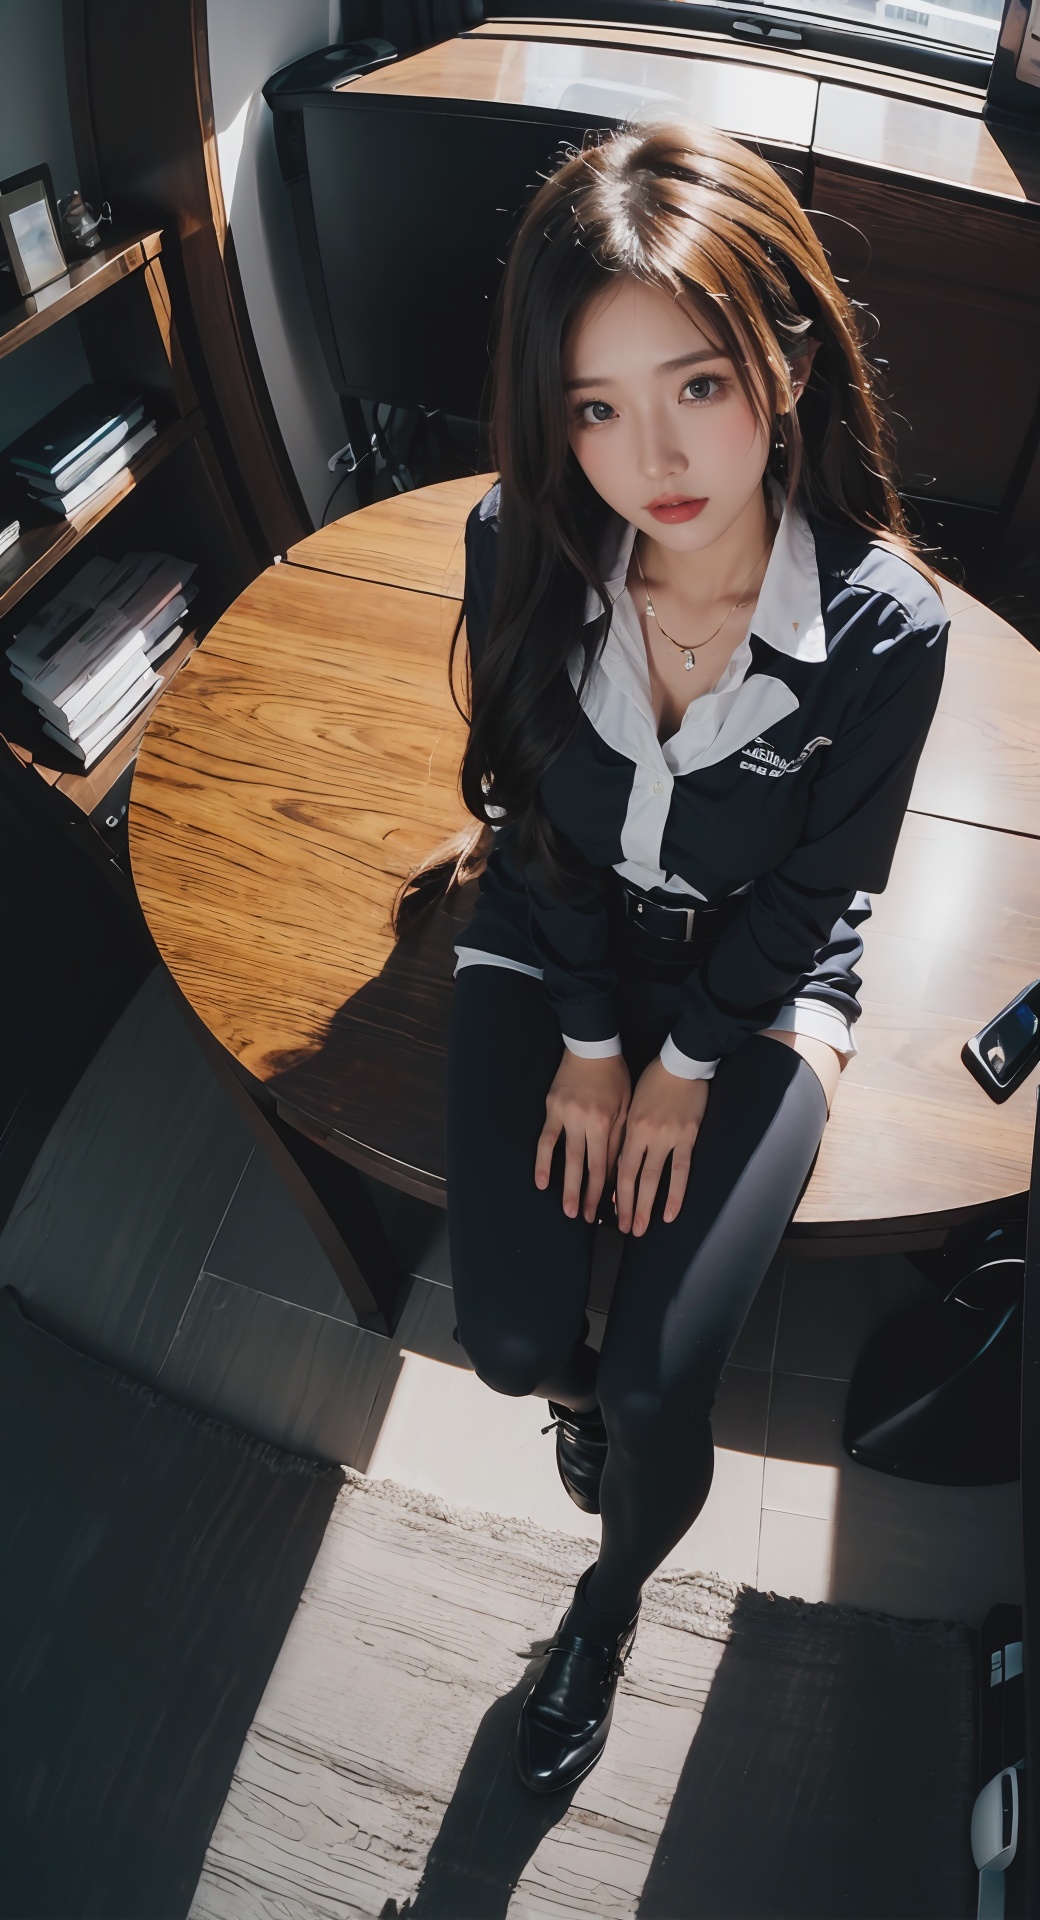 (Reality :1.3), Official art, Uniform 8k quality, Super Detail, 1 girl,masterpiece,hight quality,sitting,Tight fitting clothing,powerful,fish eye lens,**ile ,Top view angle, centered around the head,amazing,full_body,Universe, liquid